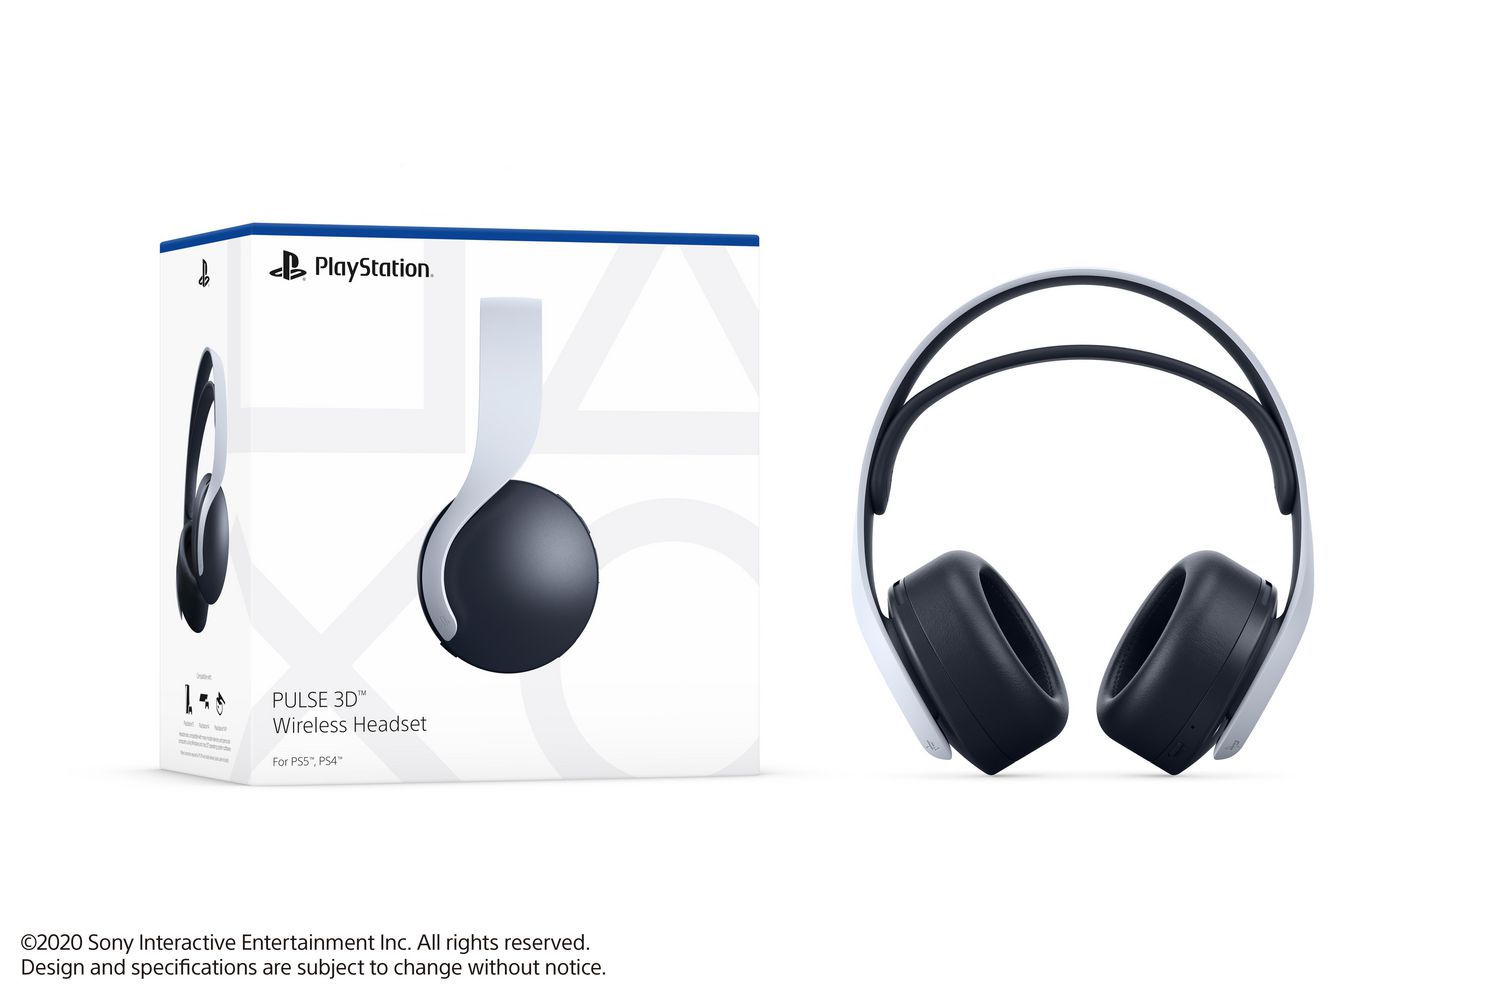 playstation gold headset canada